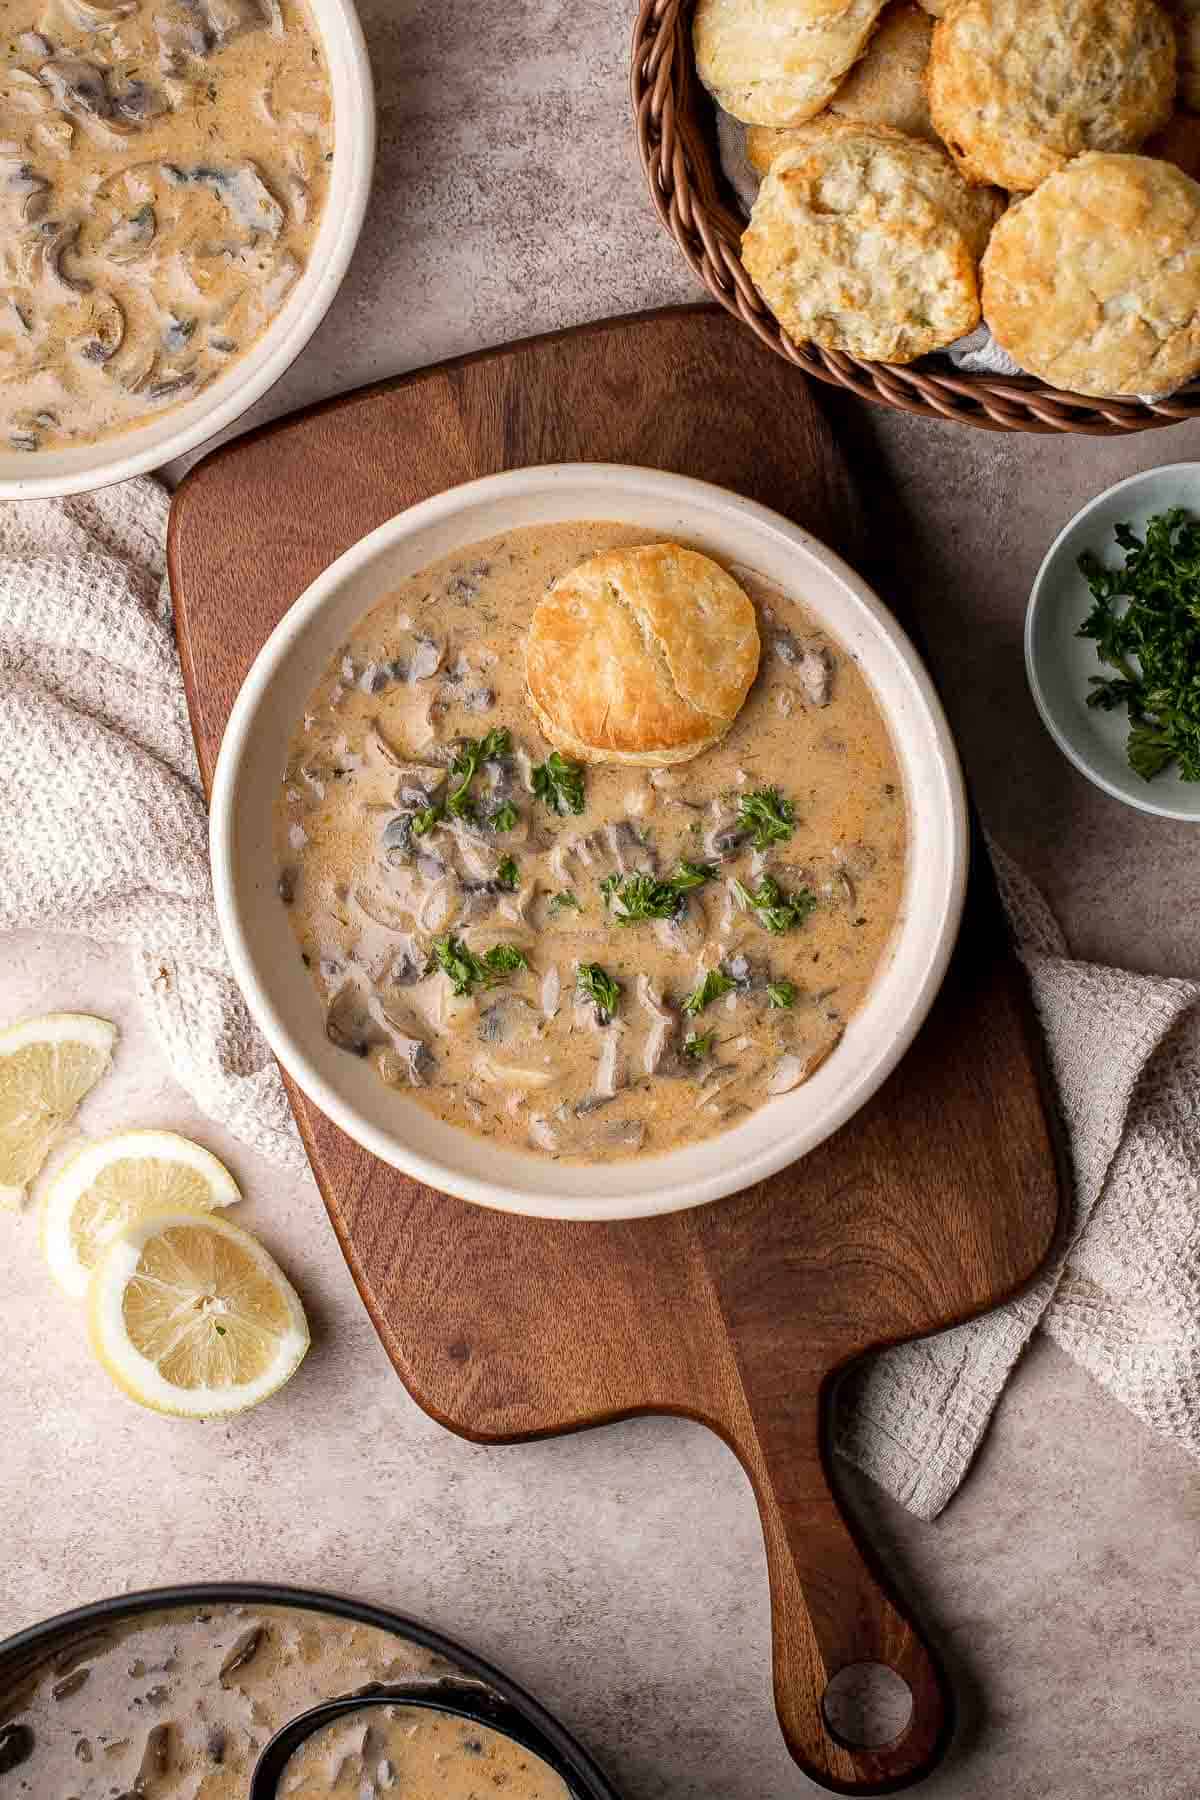 This rich, hearty Hungarian Mushroom Soup features tender, earthy mushrooms in a perfectly seasoned, creamy broth, and comes together quickly! | aheadofthyme.com